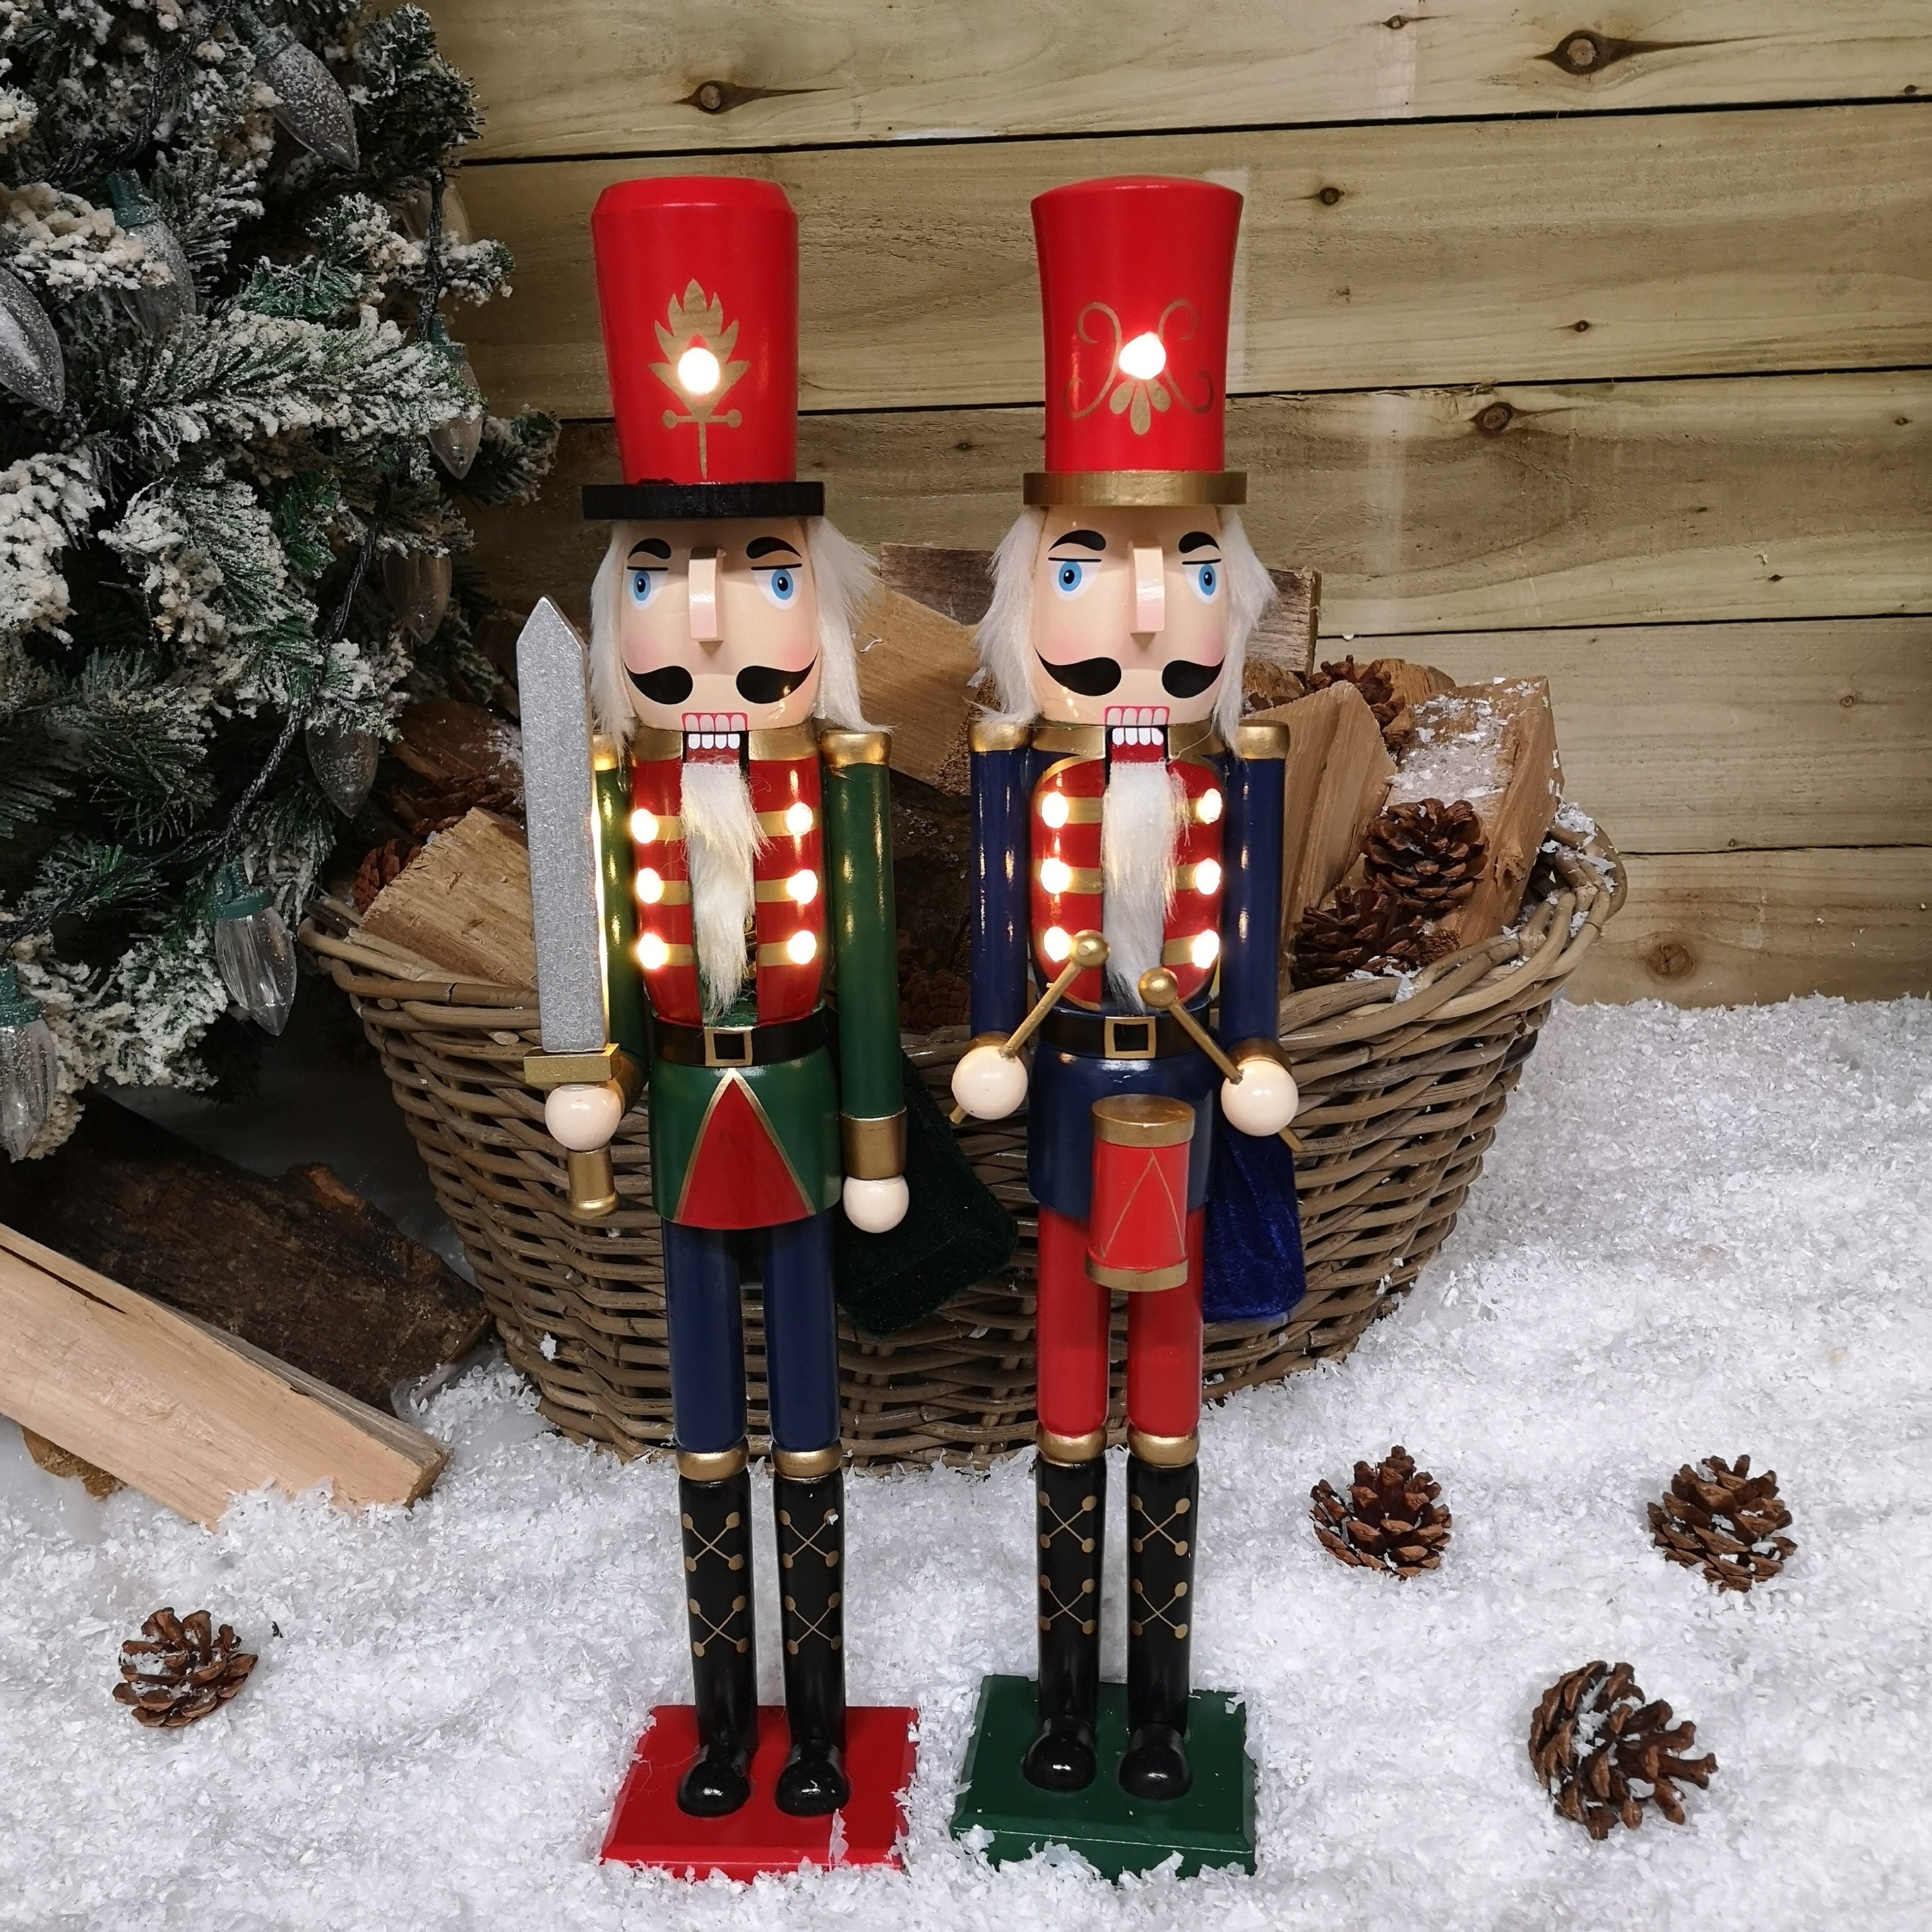 50cm LED Battery Operated Indoor Christmas Wooden Nutcracker Decoration Choice of 2 Designs